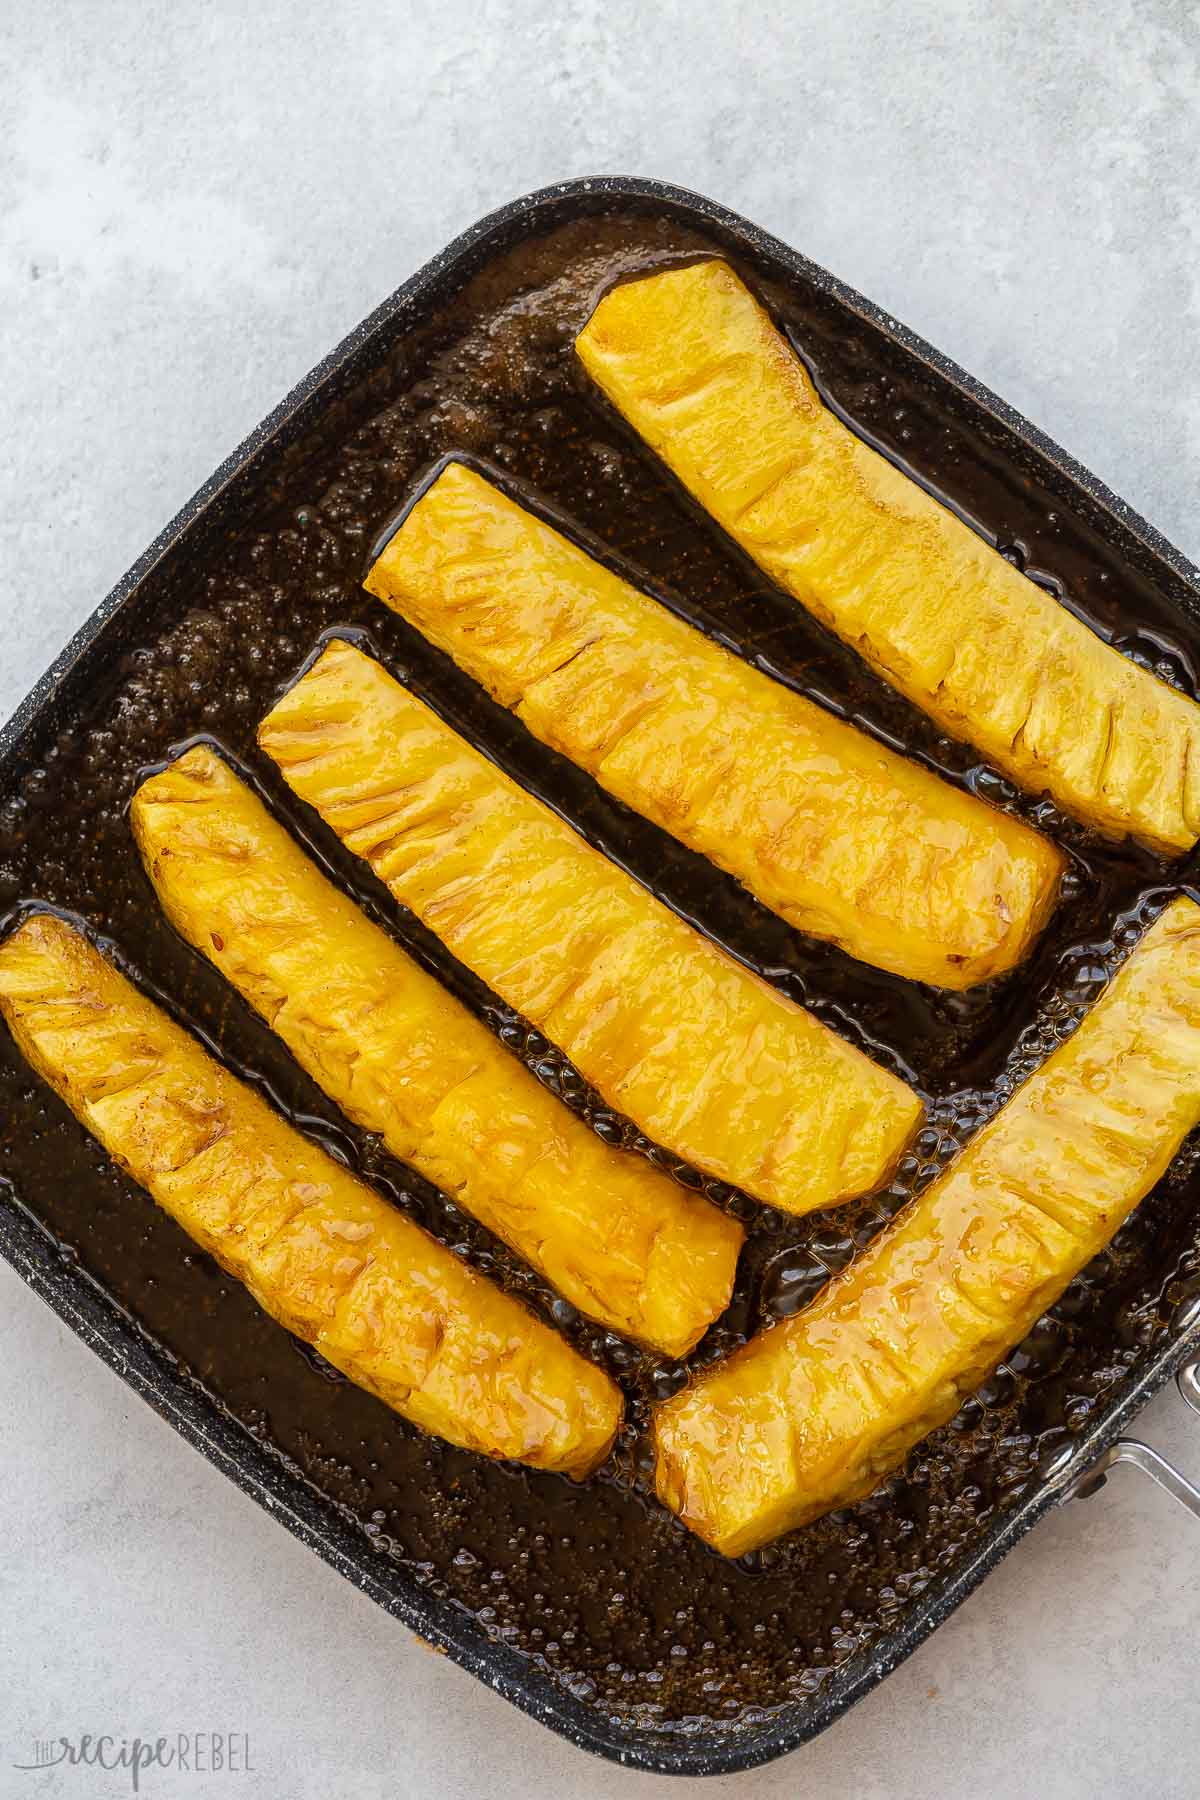 pineapple spears on grill pan after grilling.